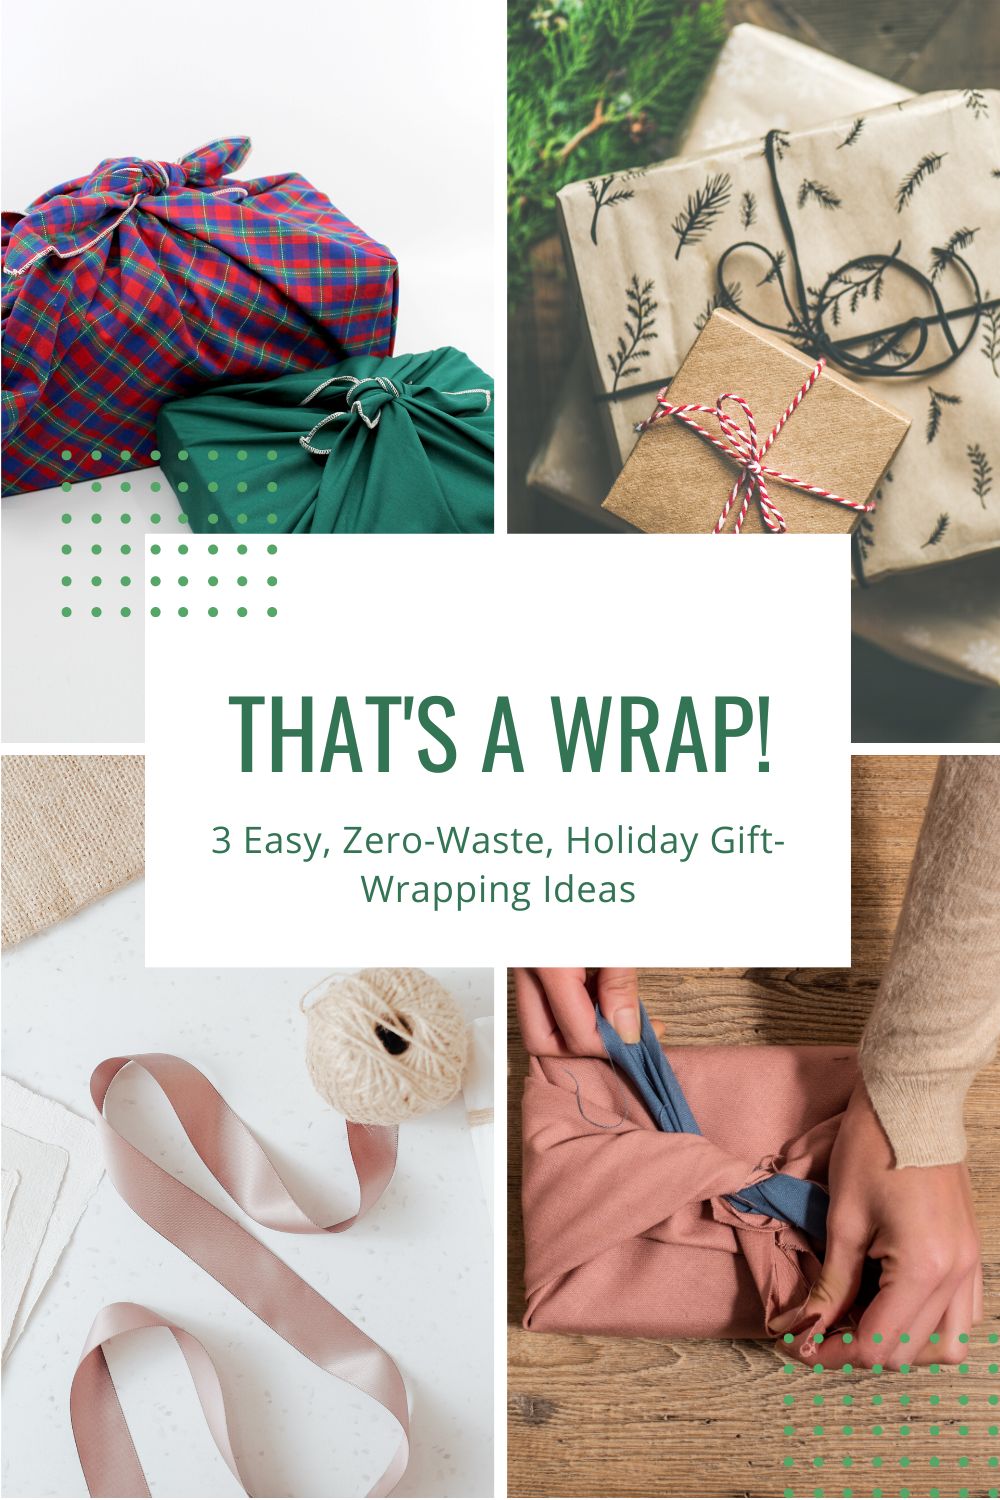 3 Easy, Zero-Waste, Holiday Gift-Wrapping Ideas